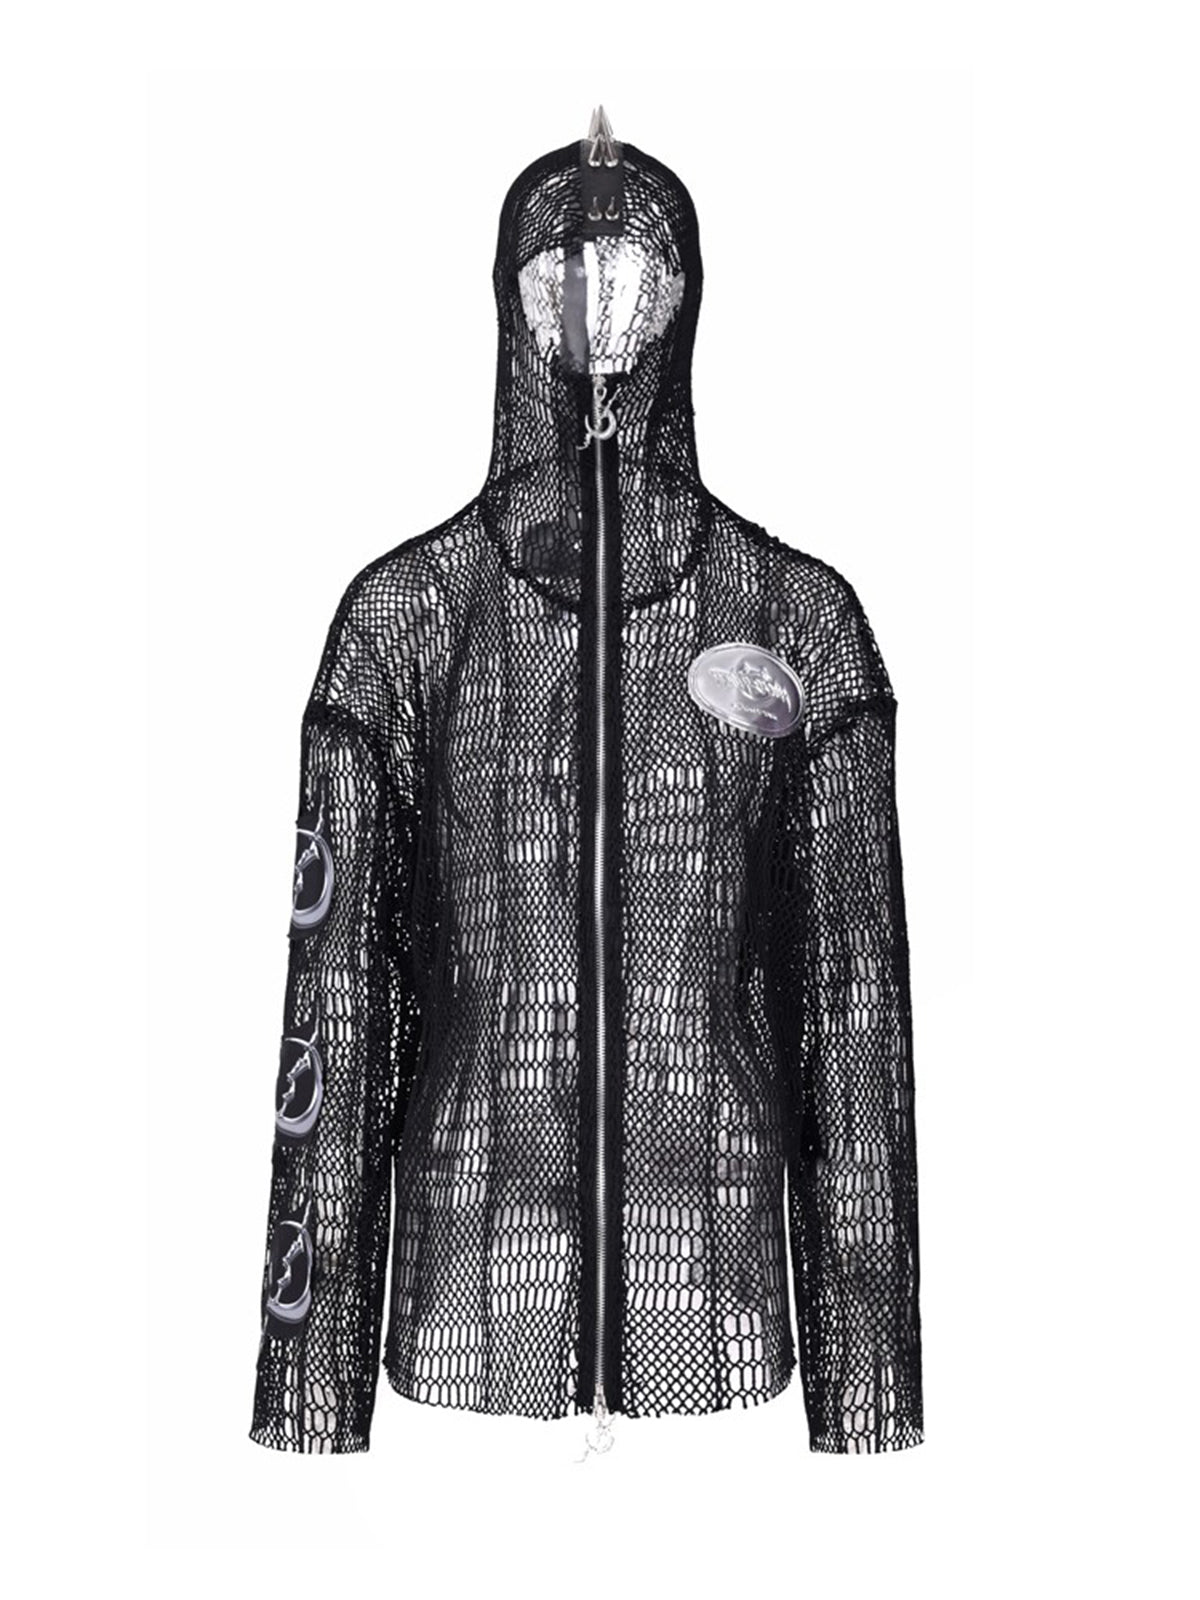 Mesh hoodie with spikes